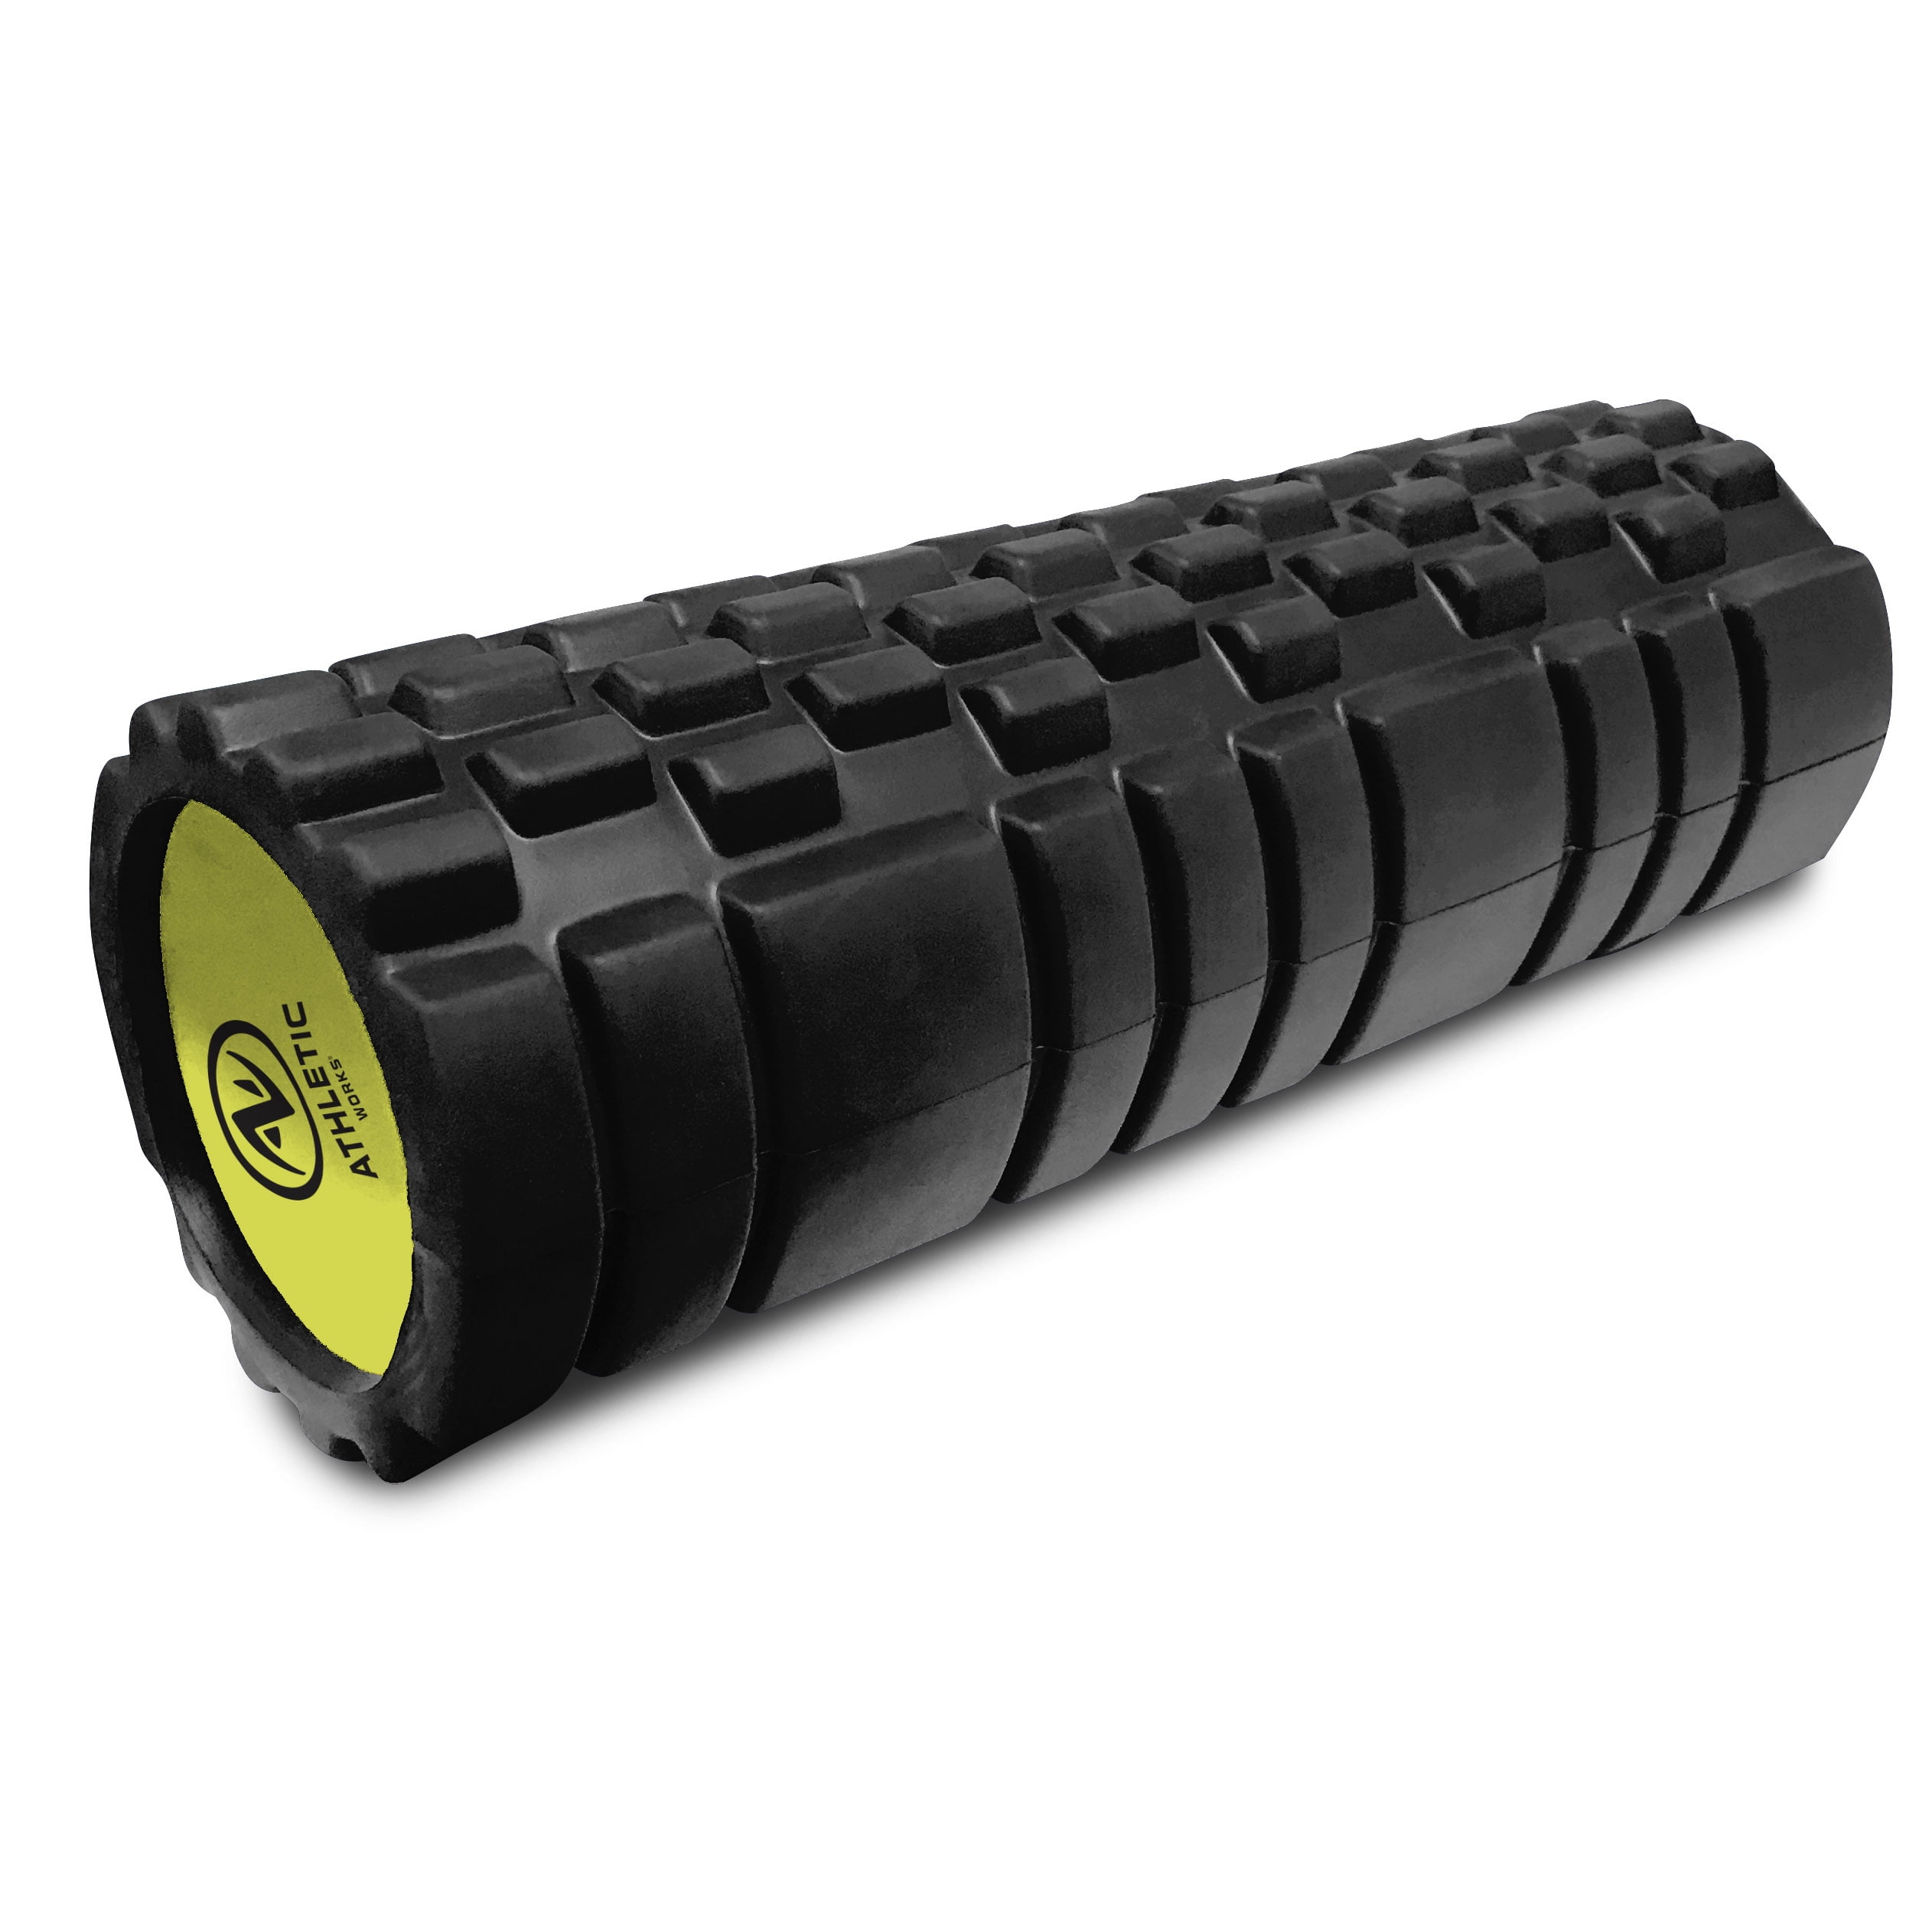 Sports & Outdoors Foam Roller Roller Muscle Foam for Muscle Massage with Exercise Book Smony Ultra Lightweight Hollow Core Muscle Roller for Deep Pain Relief in Your Aching Legs and Body 